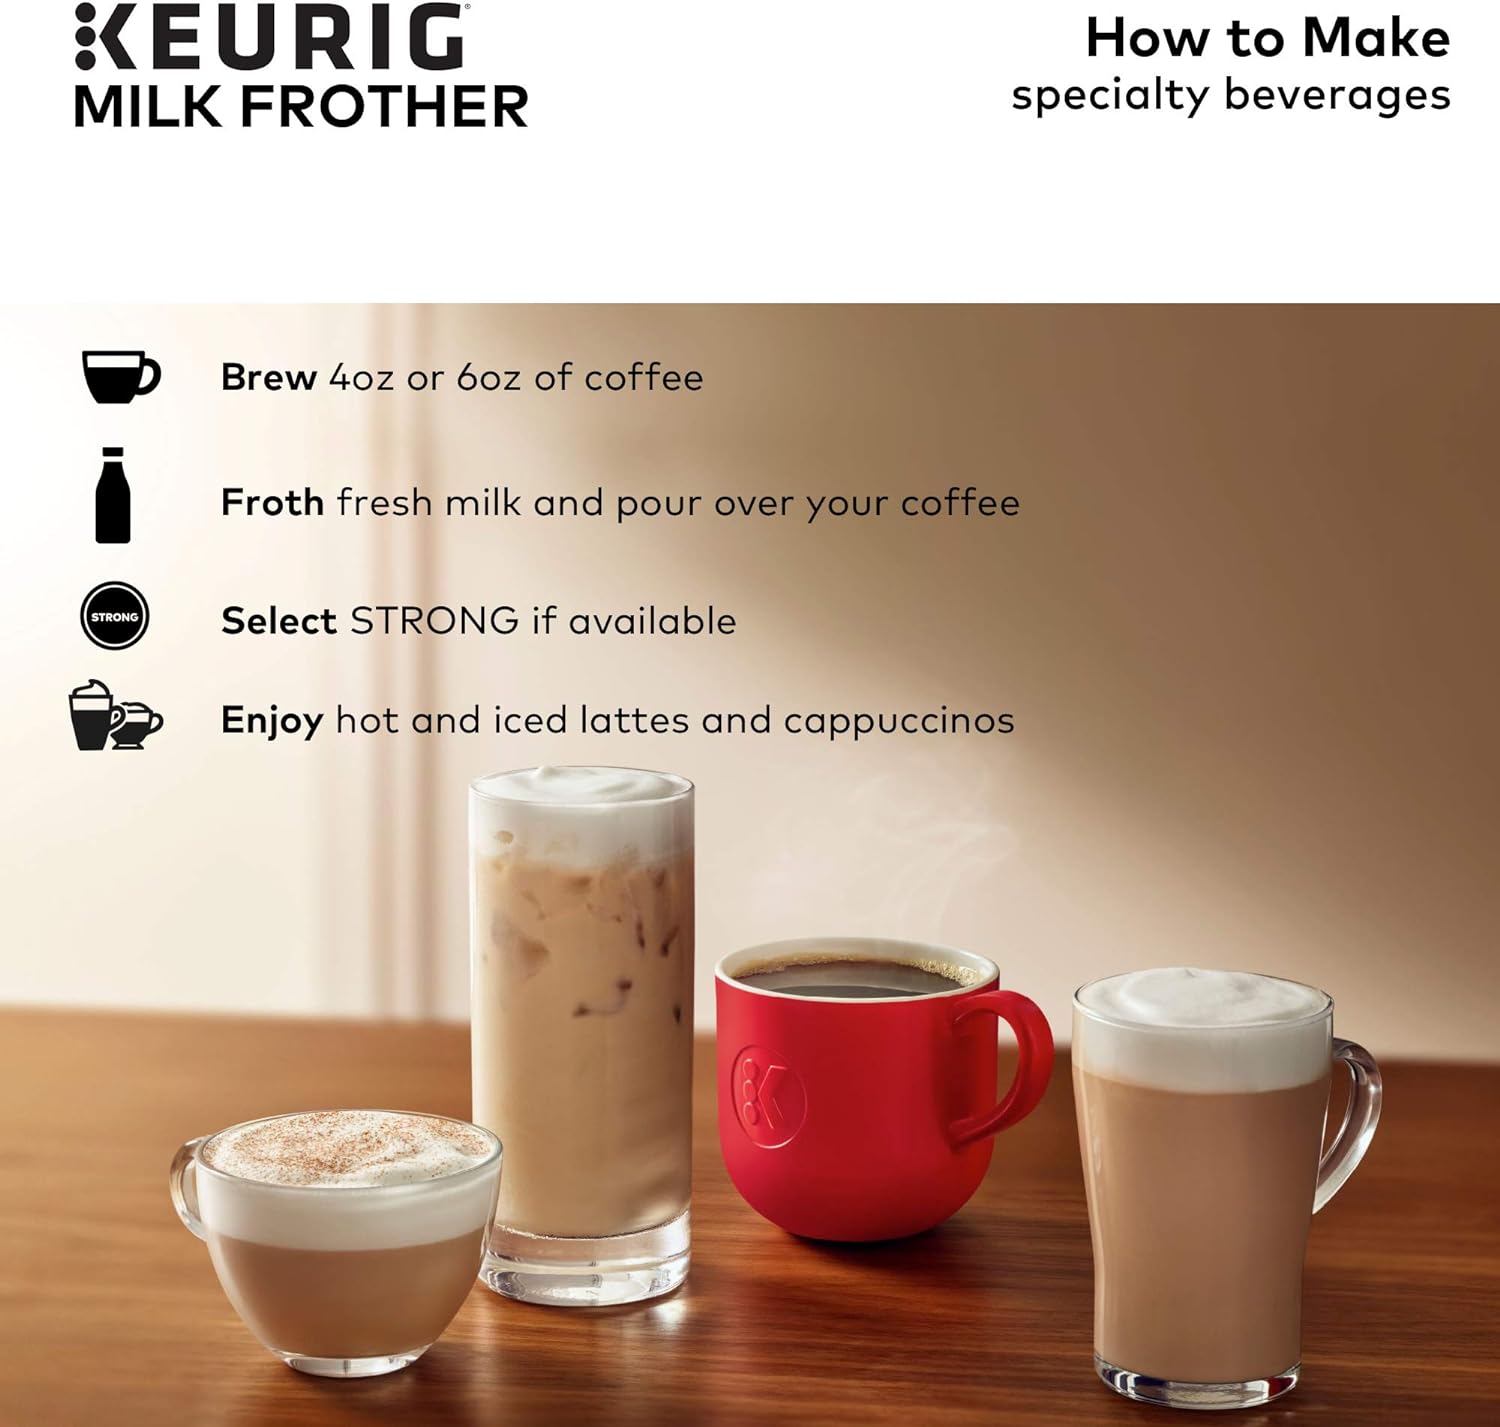 Keurig Standalone Frother Works Non-Dairy Milk, Hot and Cold Frothing, 6 Oz, Black